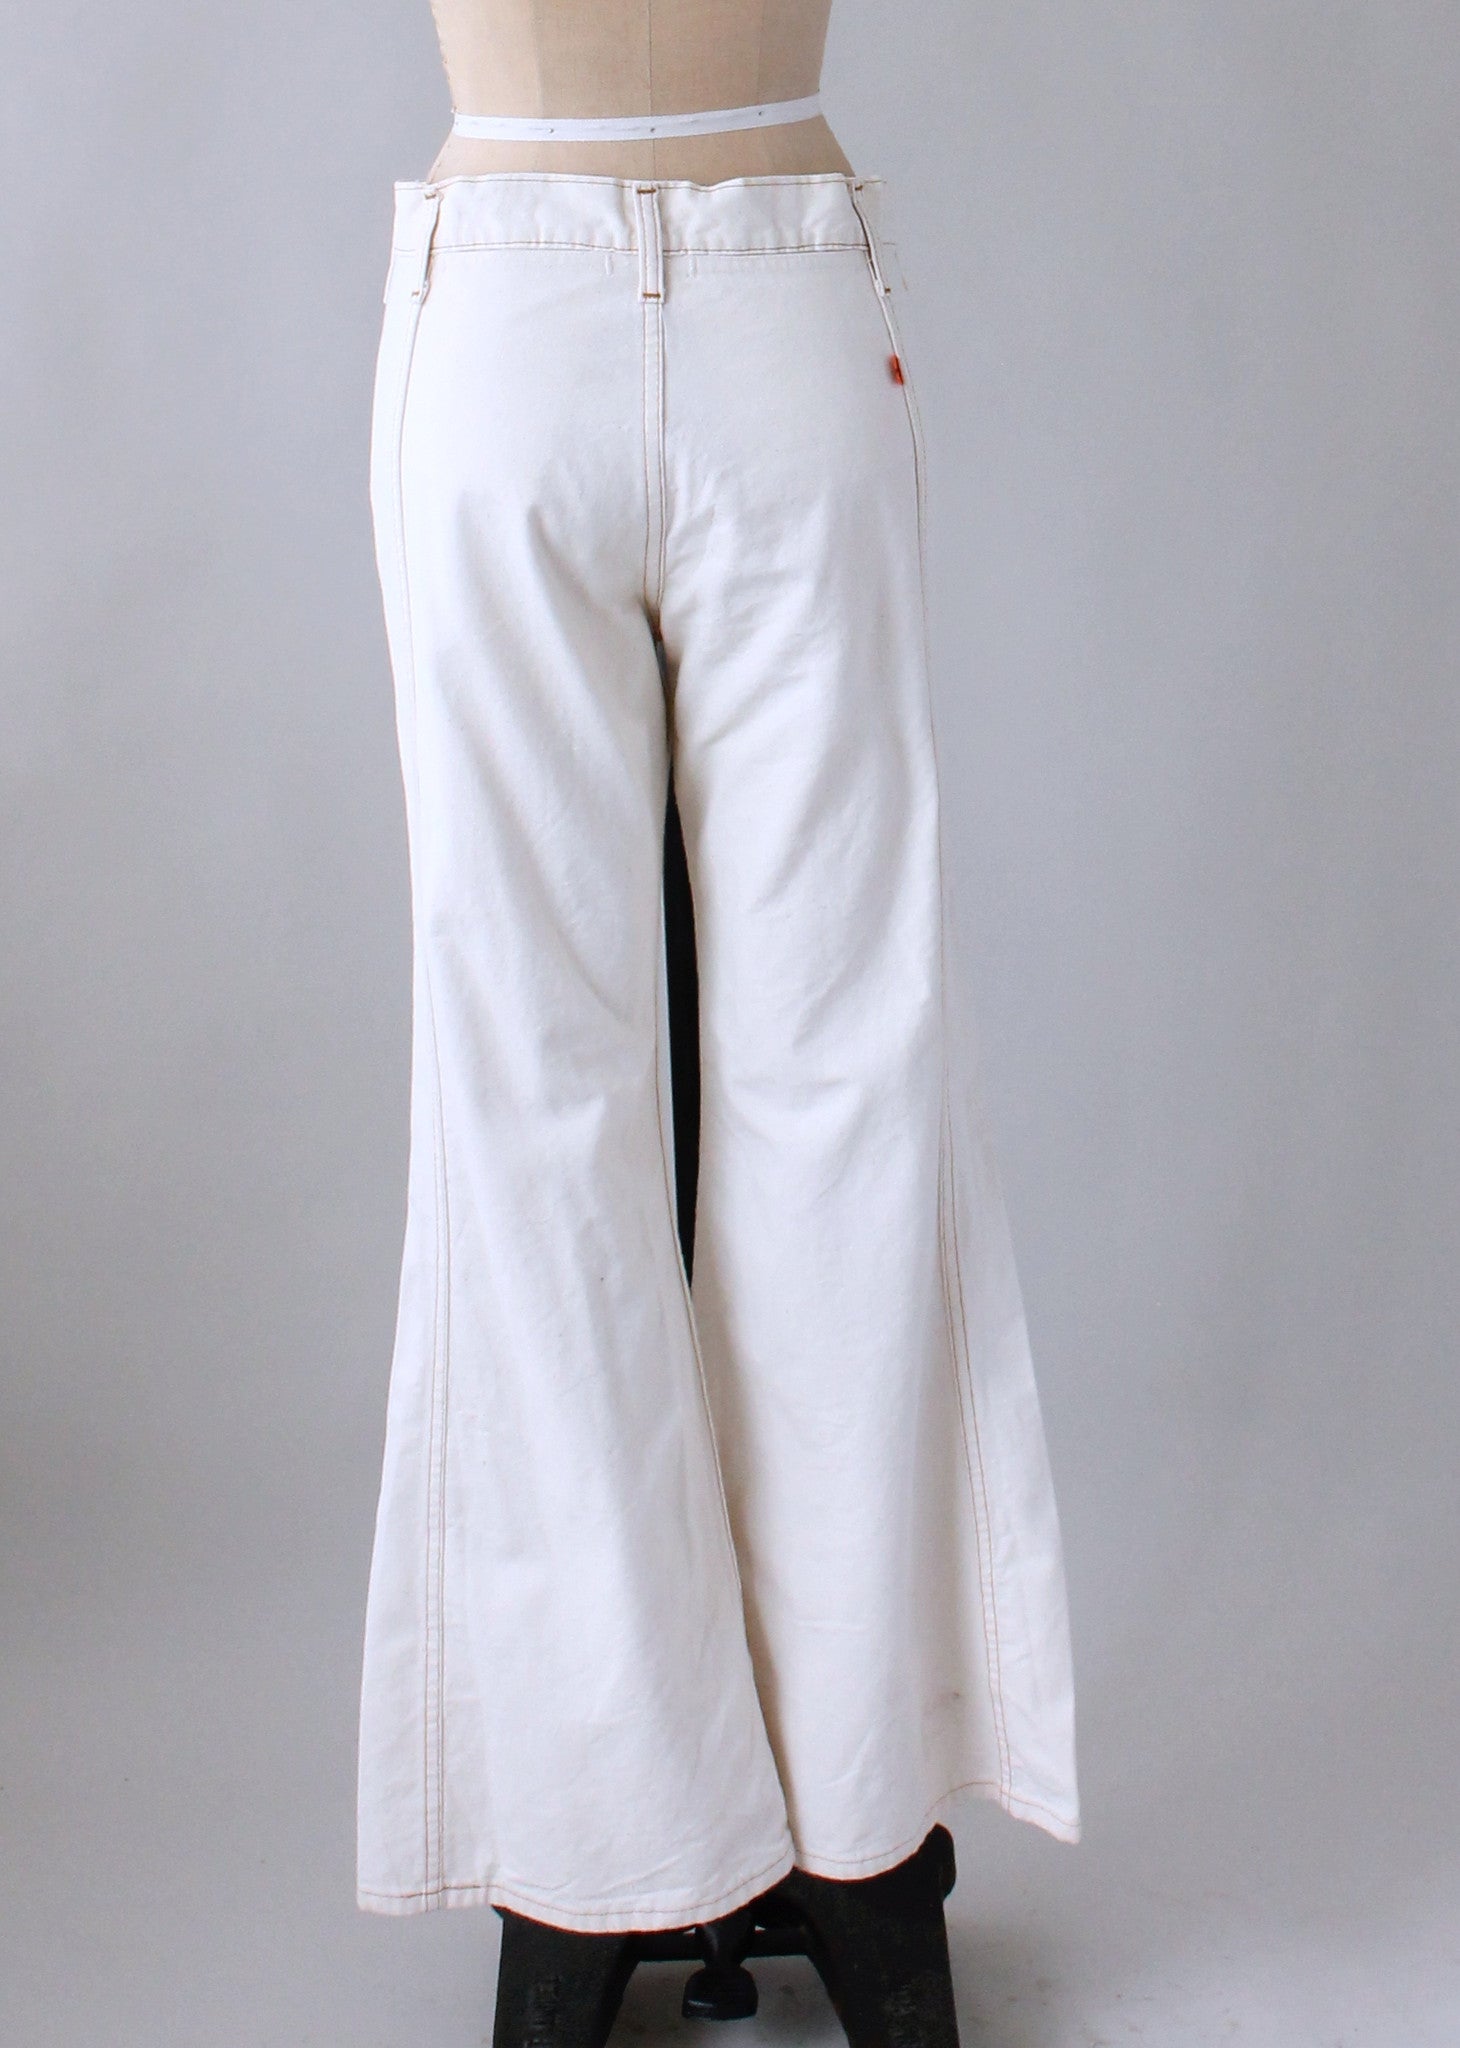 Levi's Vintage Bell Bottom Jeans 1970s Flared Denim Pants High Waist Jeans  White Tab Made in France NOS Size US 27/28 